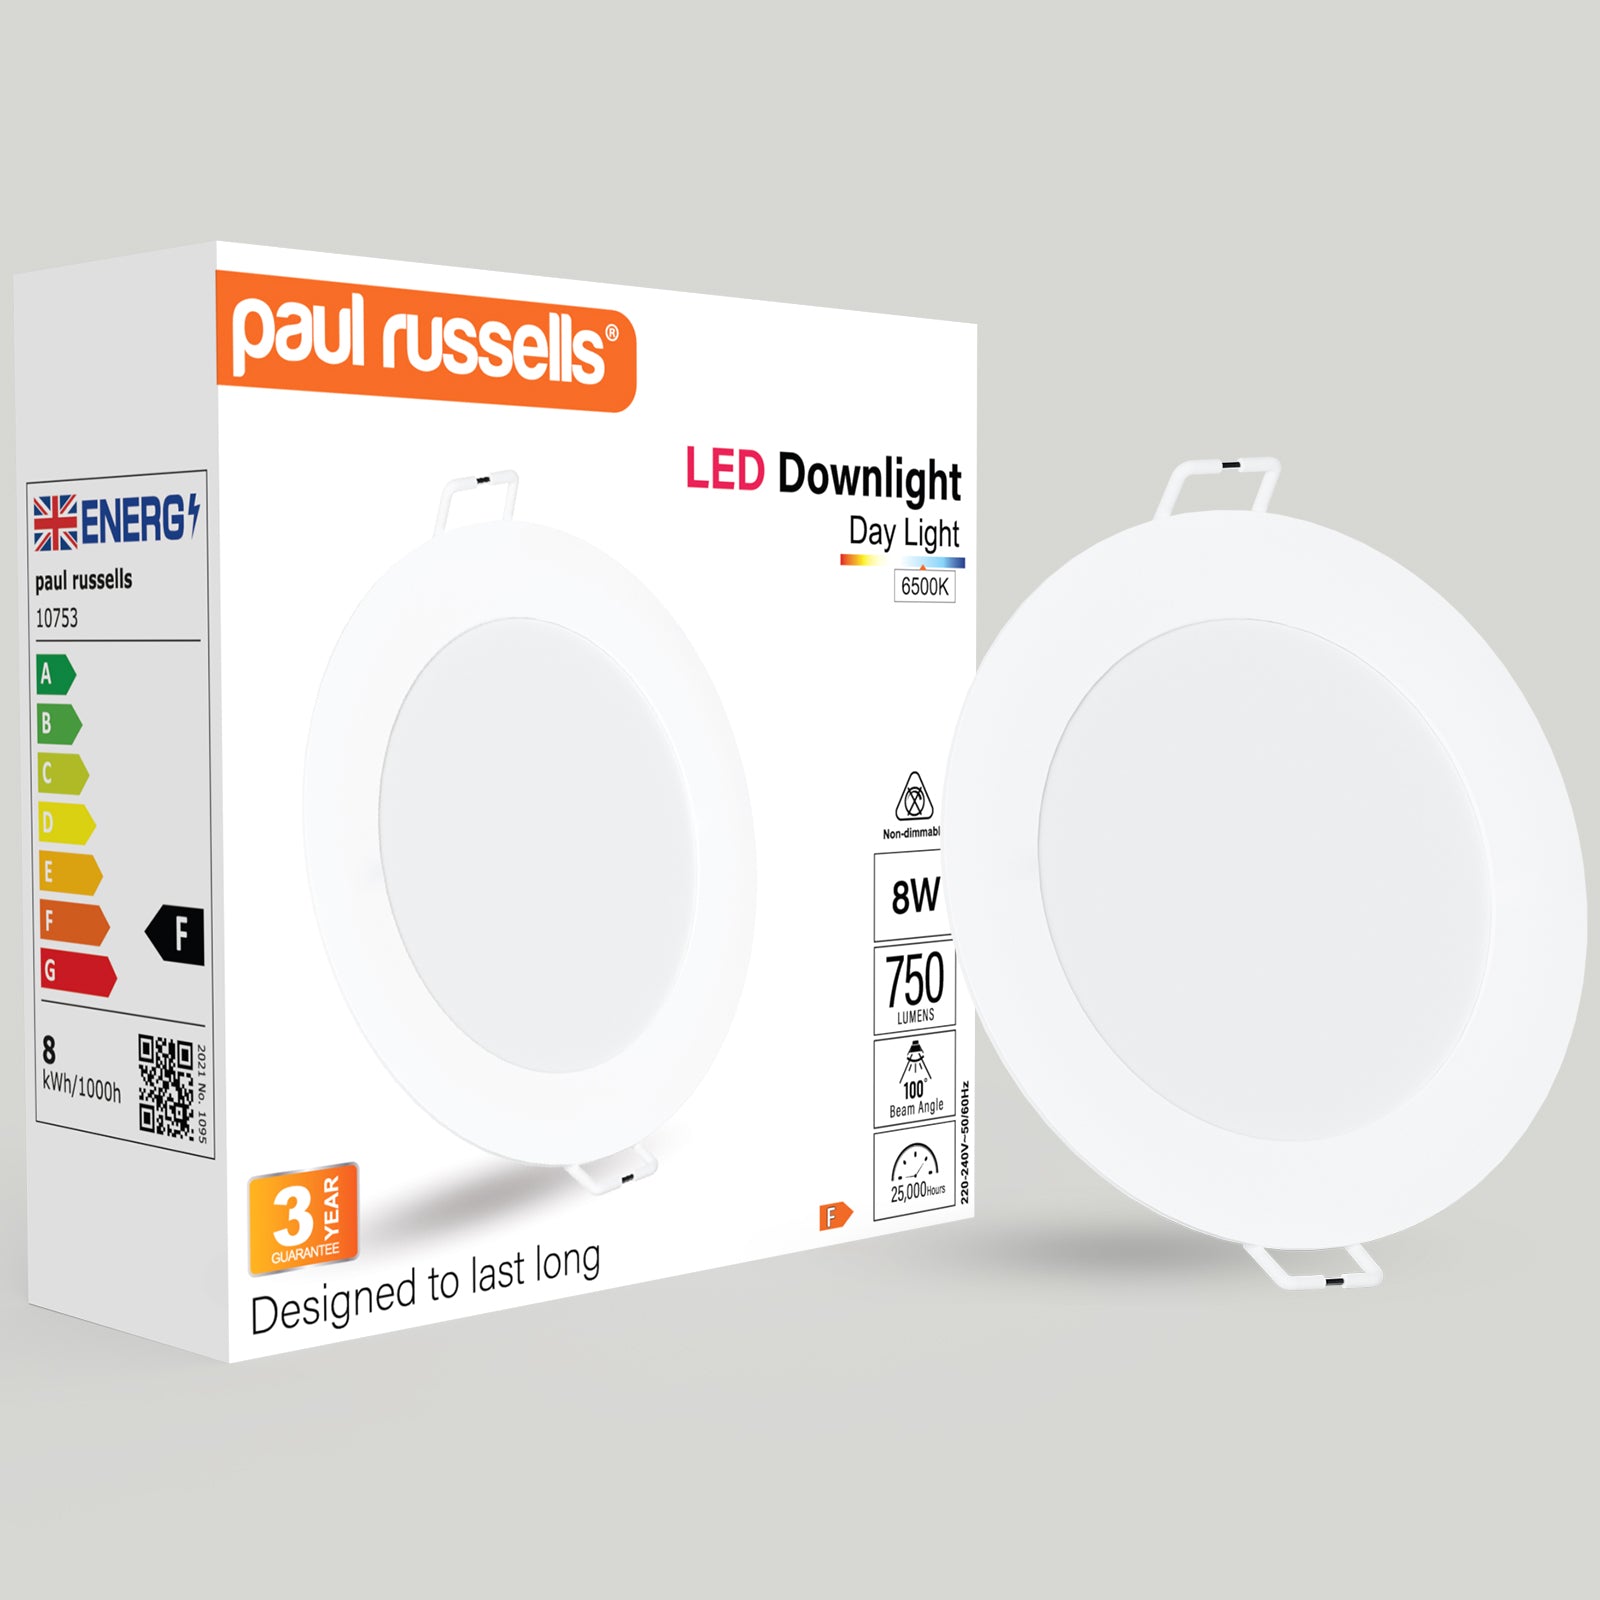 8W, LED Round Ceiling Downlights, 750 Lumens, 6500K Day Light, Non-Dimmable Panel Spotlights